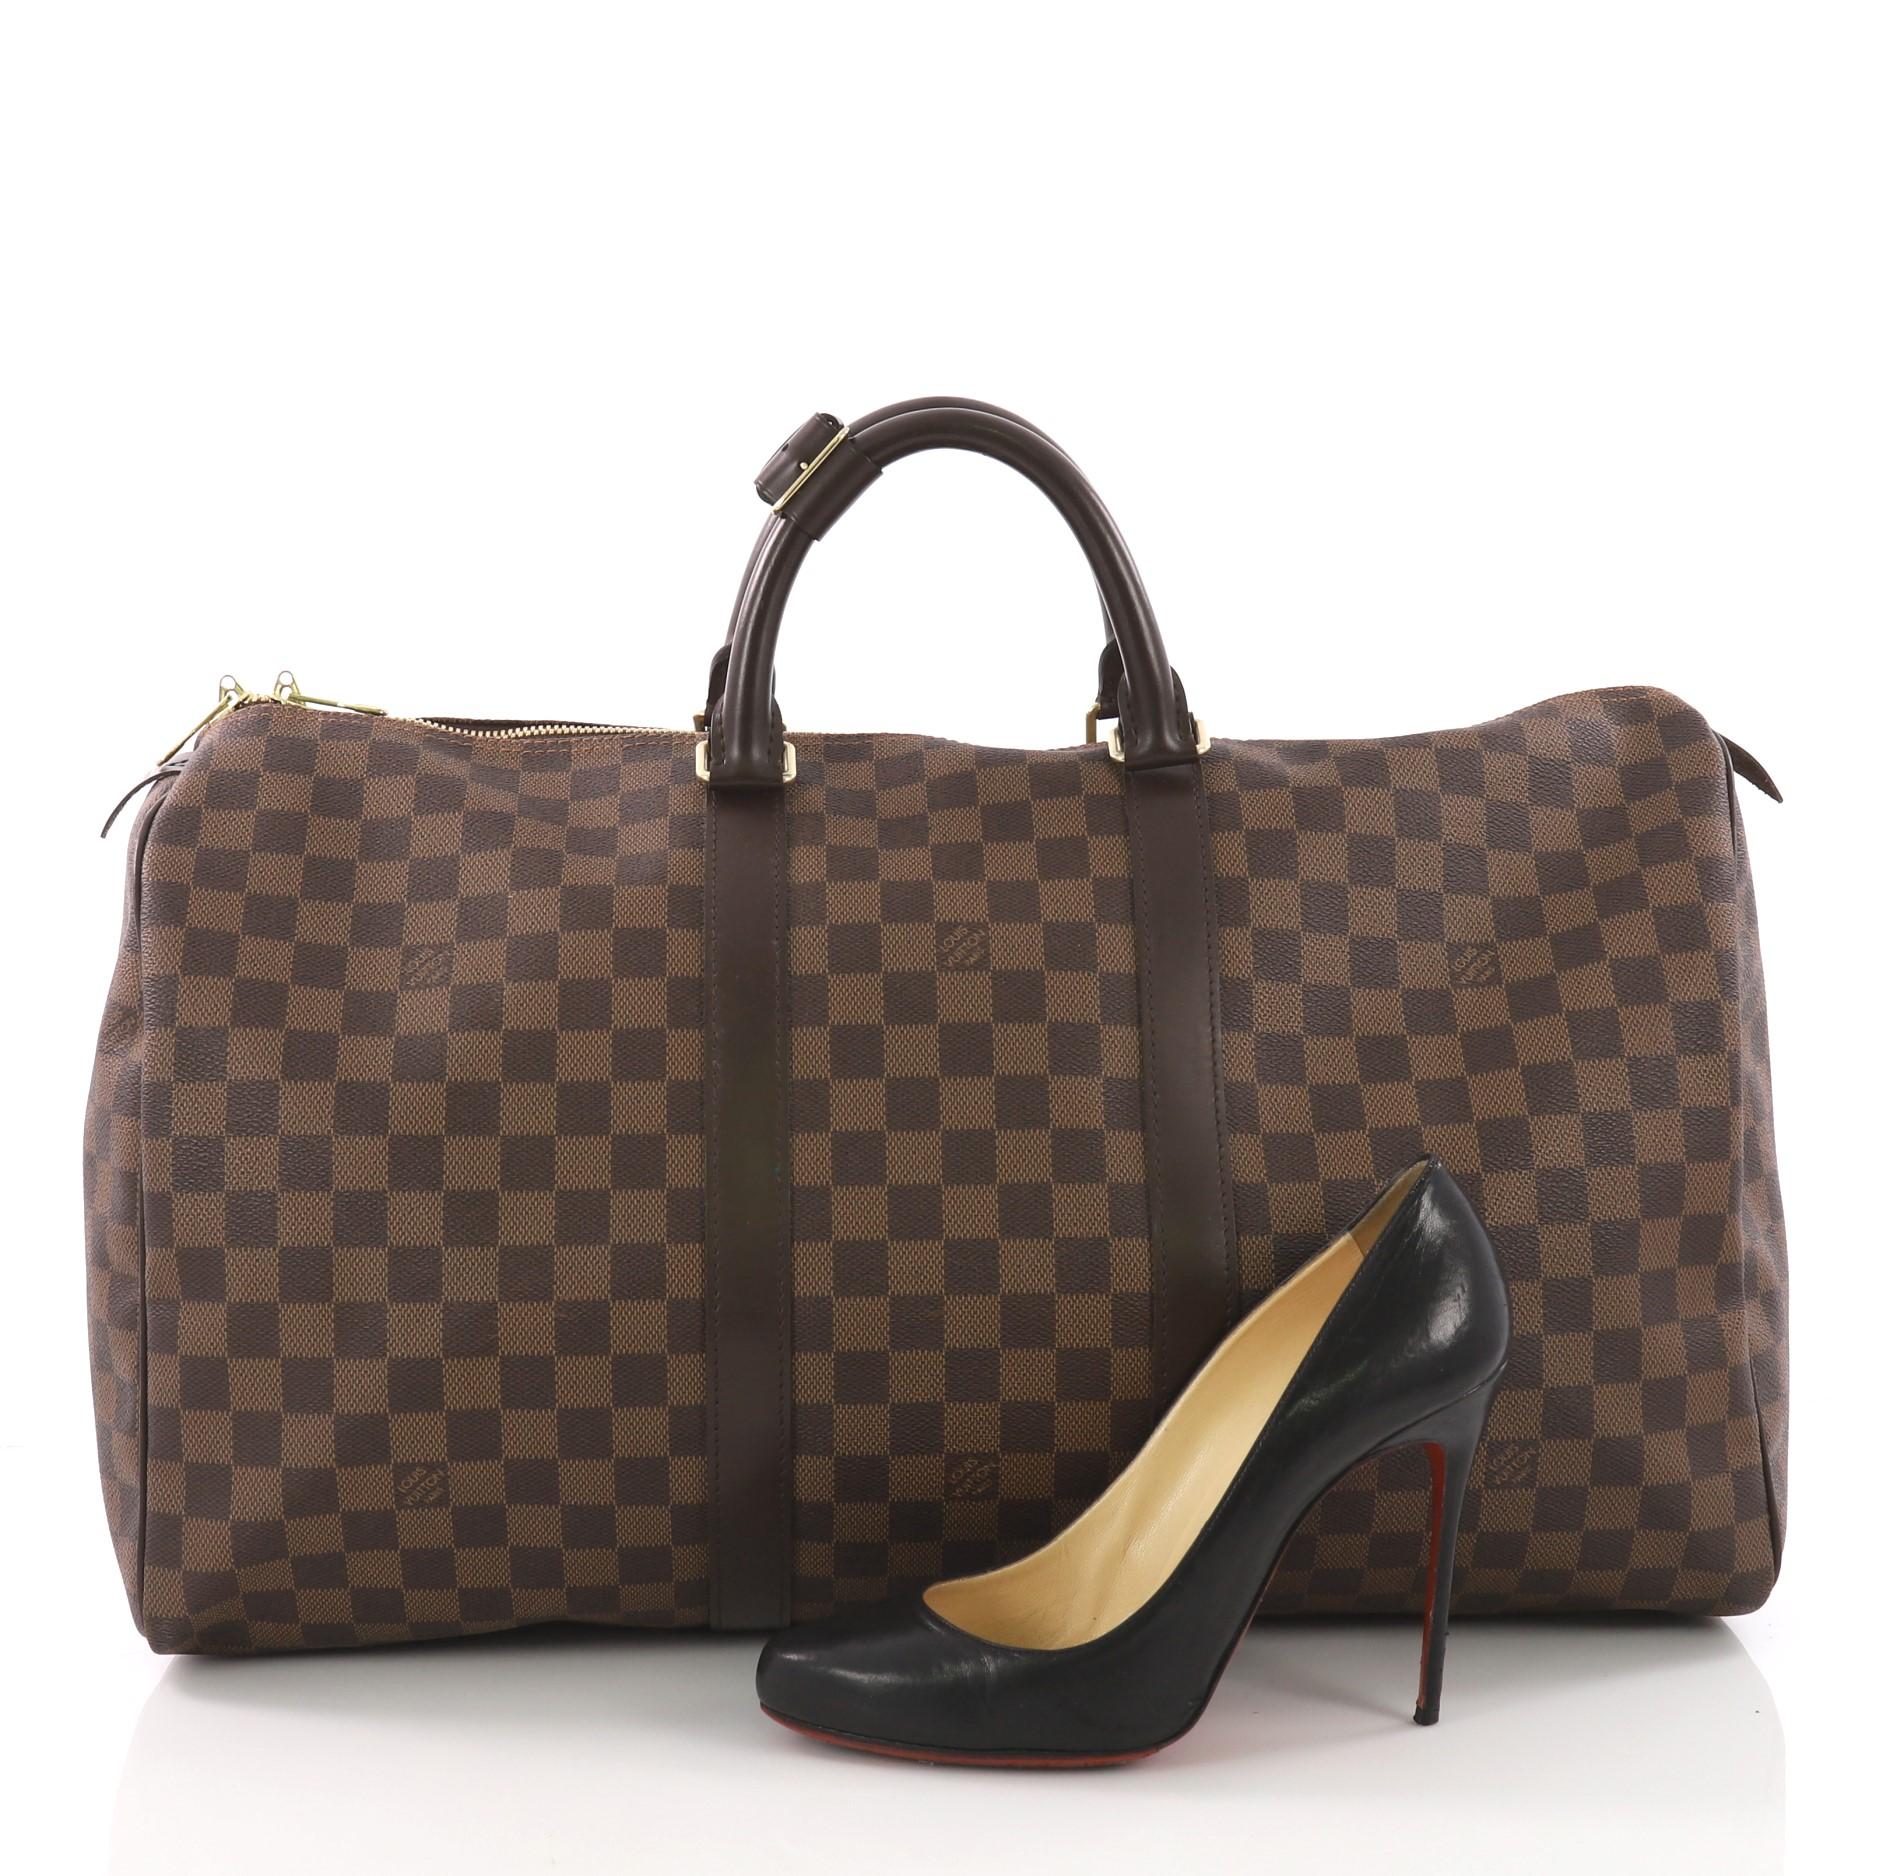 This Louis Vuitton Keepall Bag Damier 50, crafted in damier ebene coated canvas, features dual rolled handles and gold-tone hardware. Its dual-zip closure opens to a brown fabric interior. Authenticity code reads: MB2160. **Note: Shoe photographed